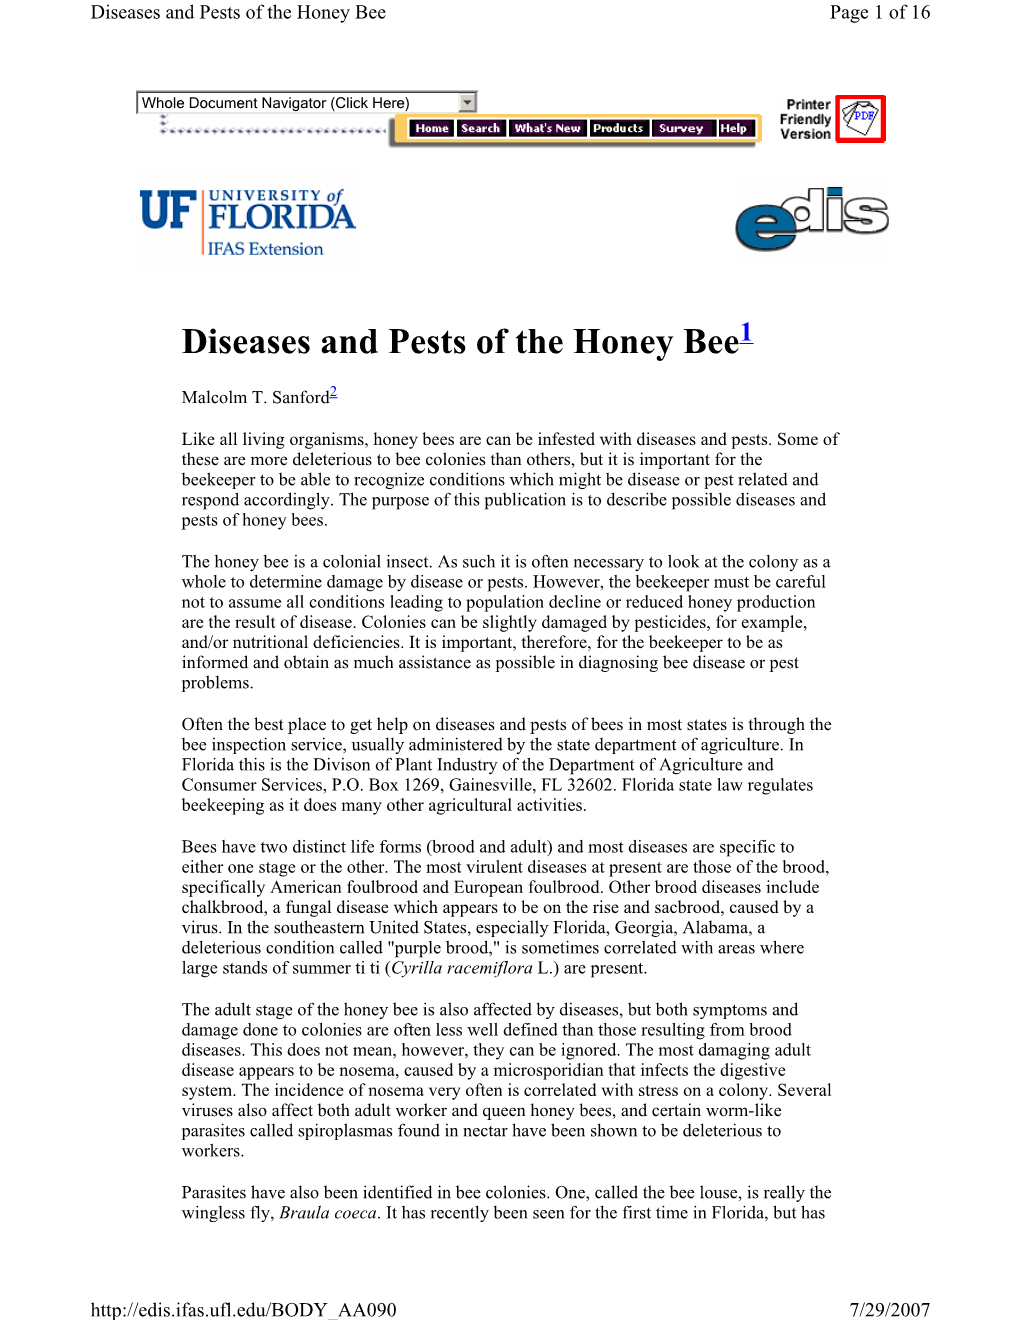 Diseases and Pests of the Honey Bee Page 1 of 16